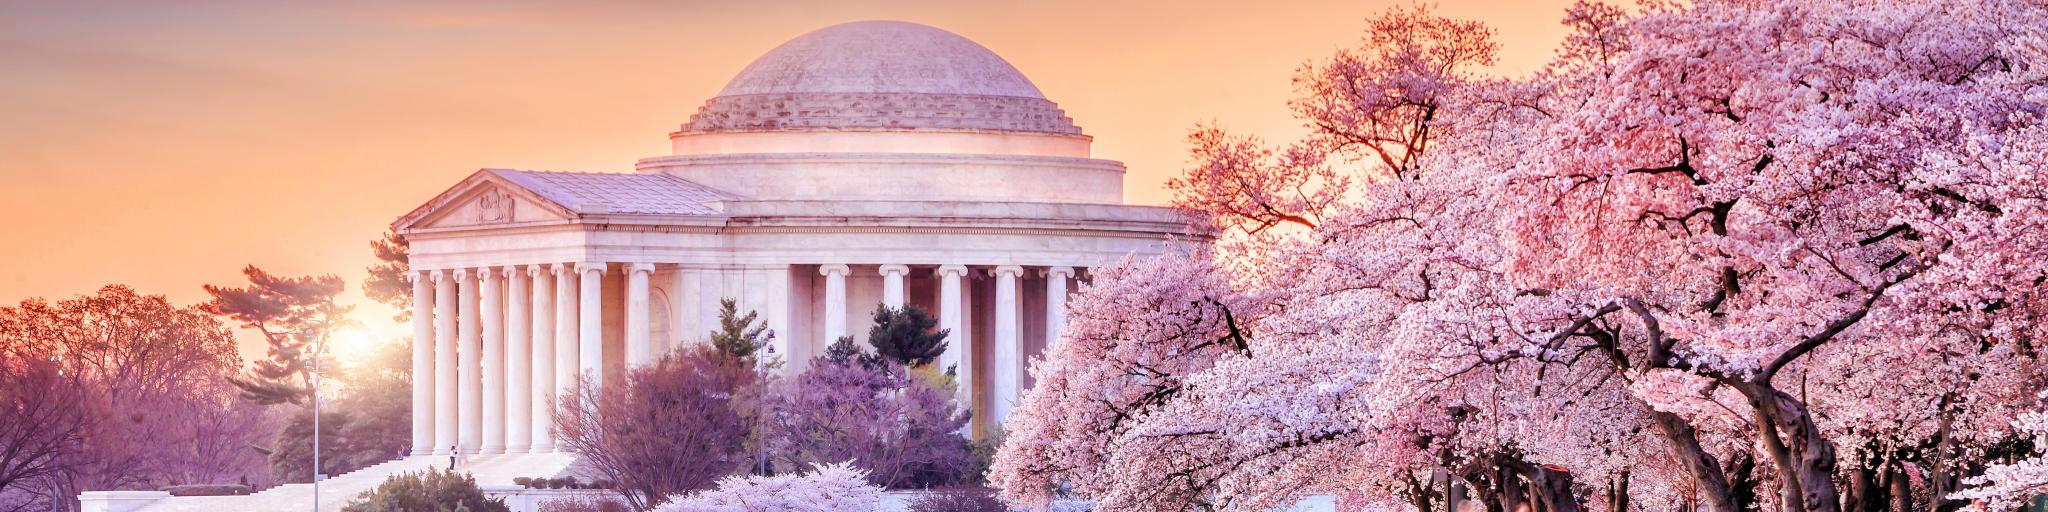 Beautiful pink cherry blossoms near the famous memorial in Washington DC during a pink sunset